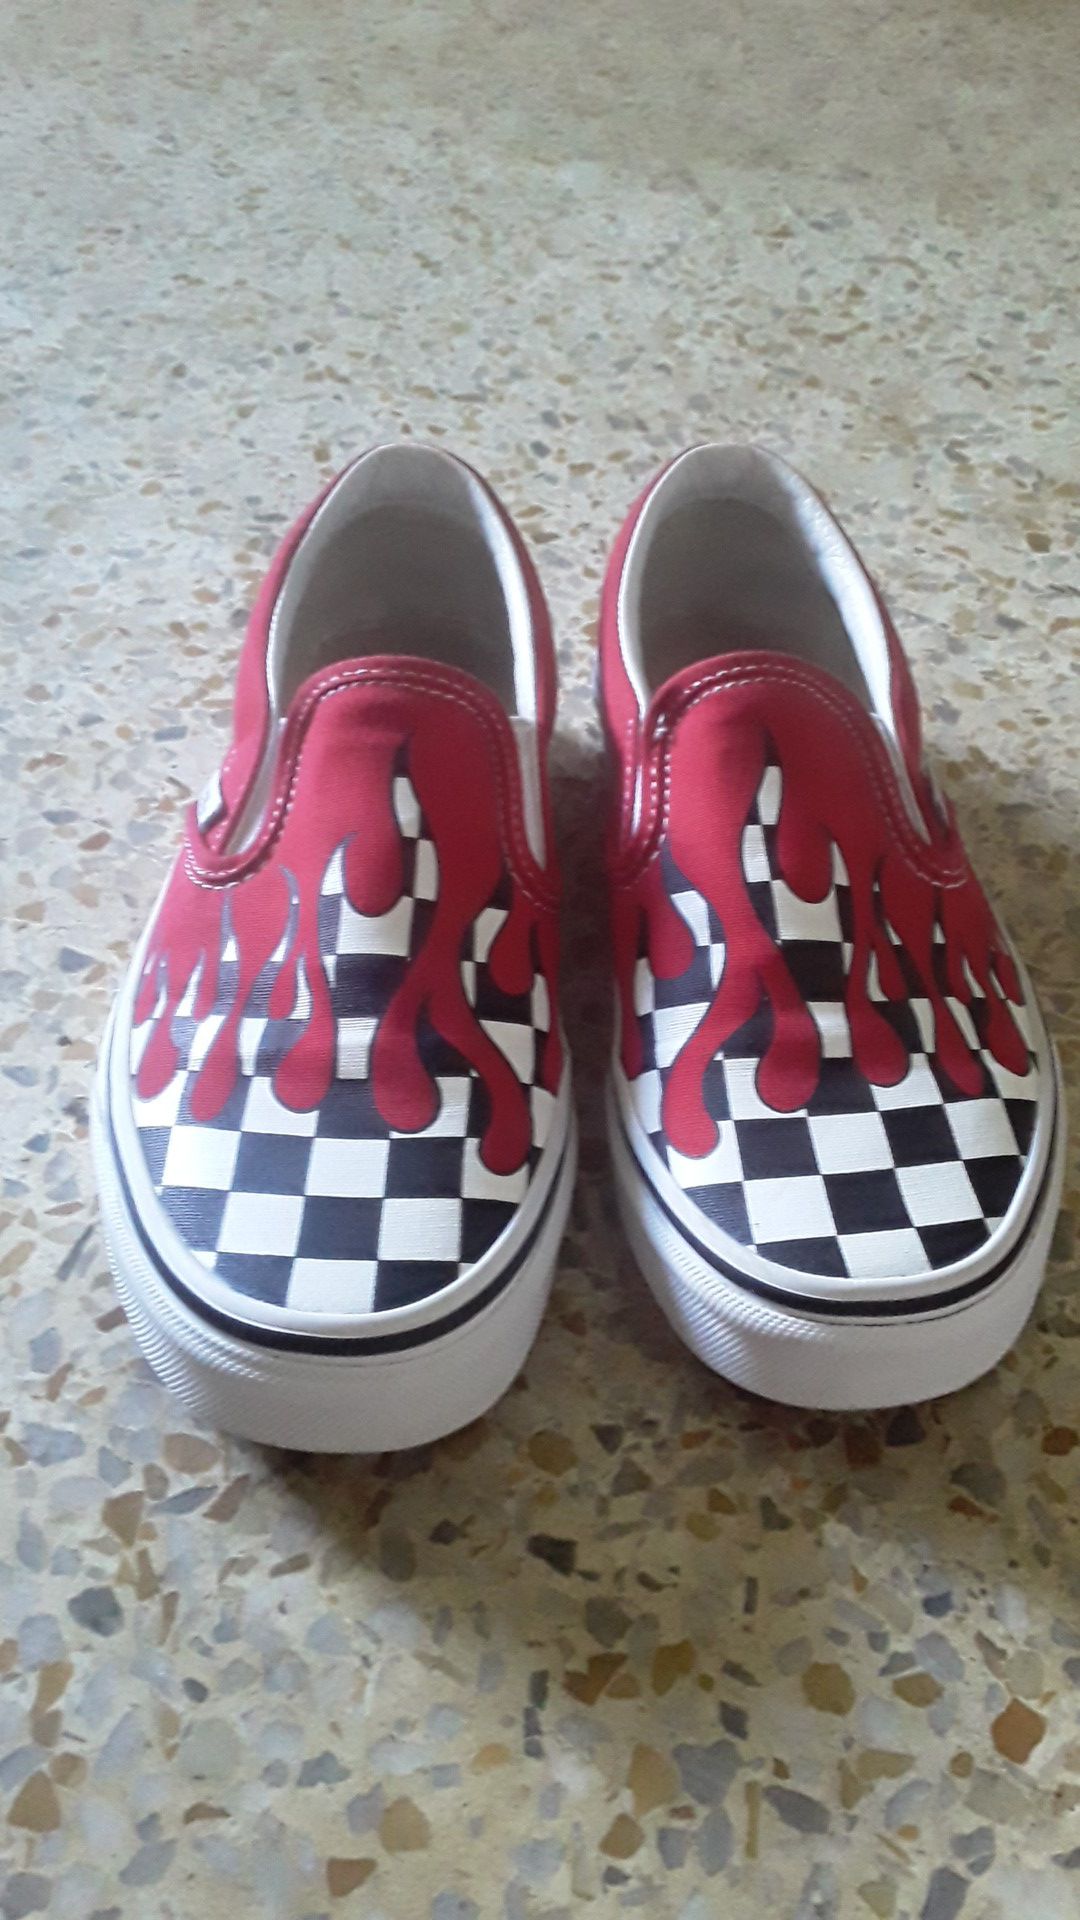 Checkered Van's with red drip